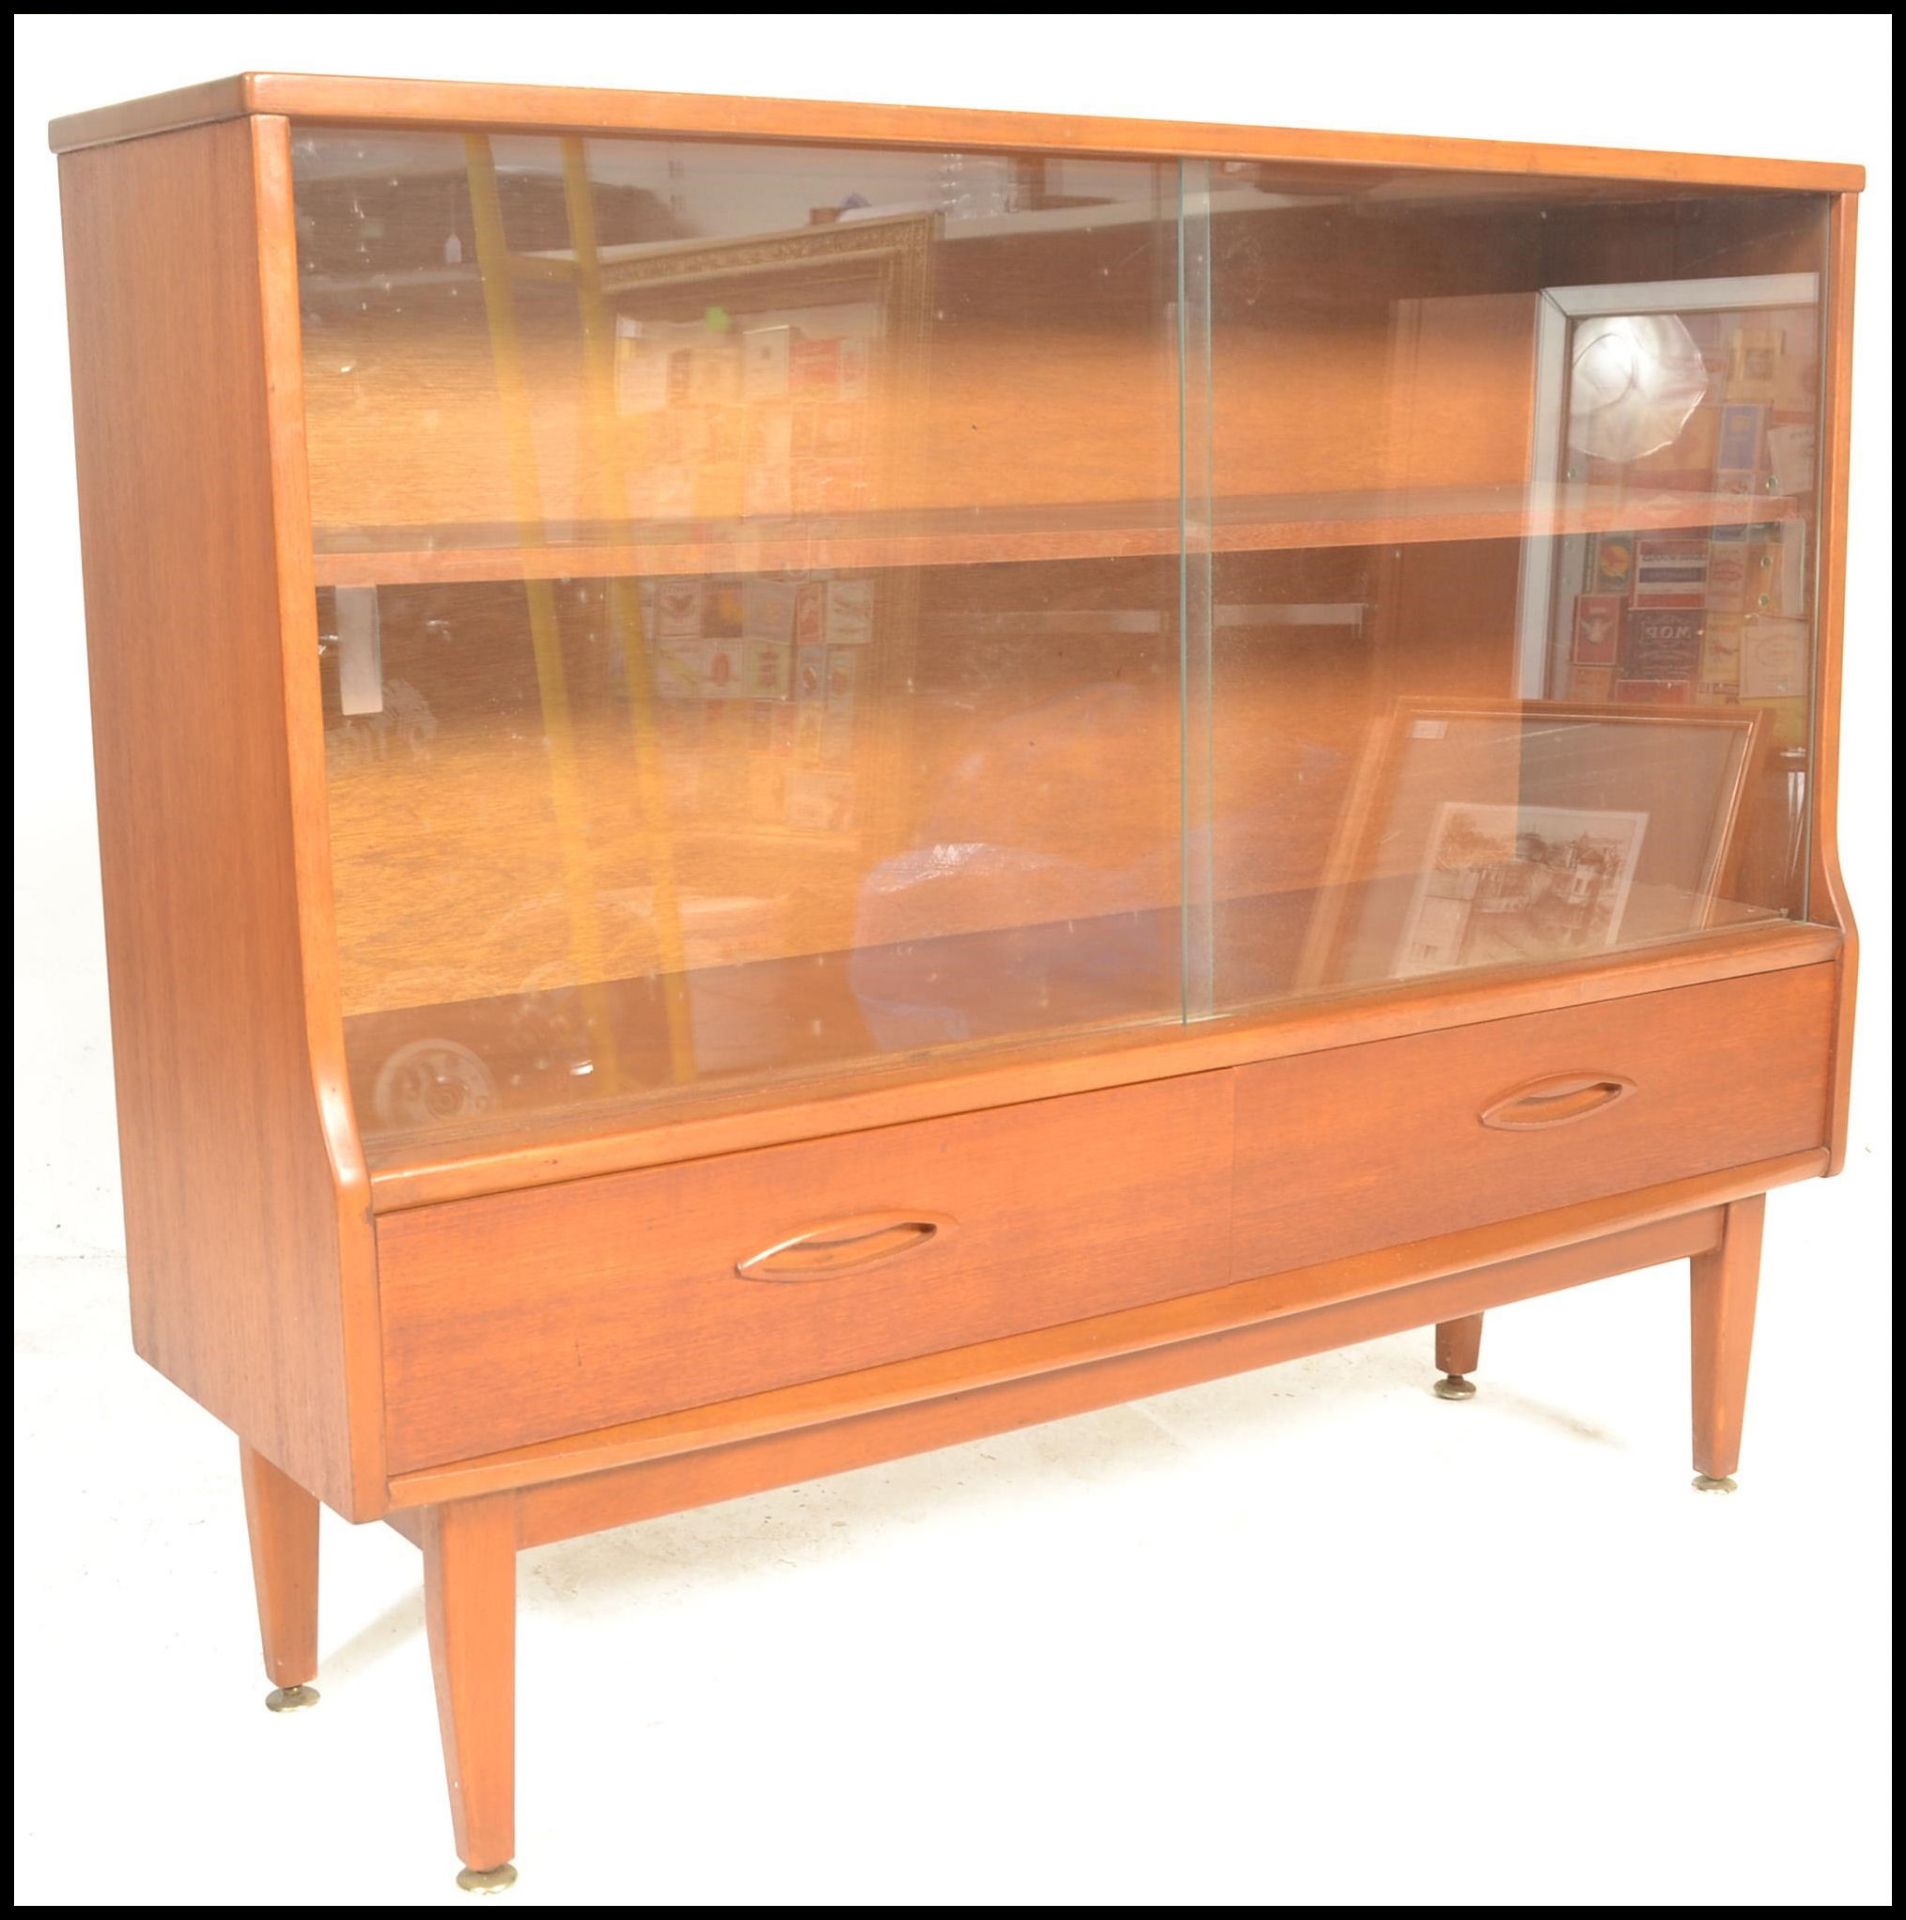 A retro 20th Century teak wood display cabinet having twin glass sliding doors with a shelved